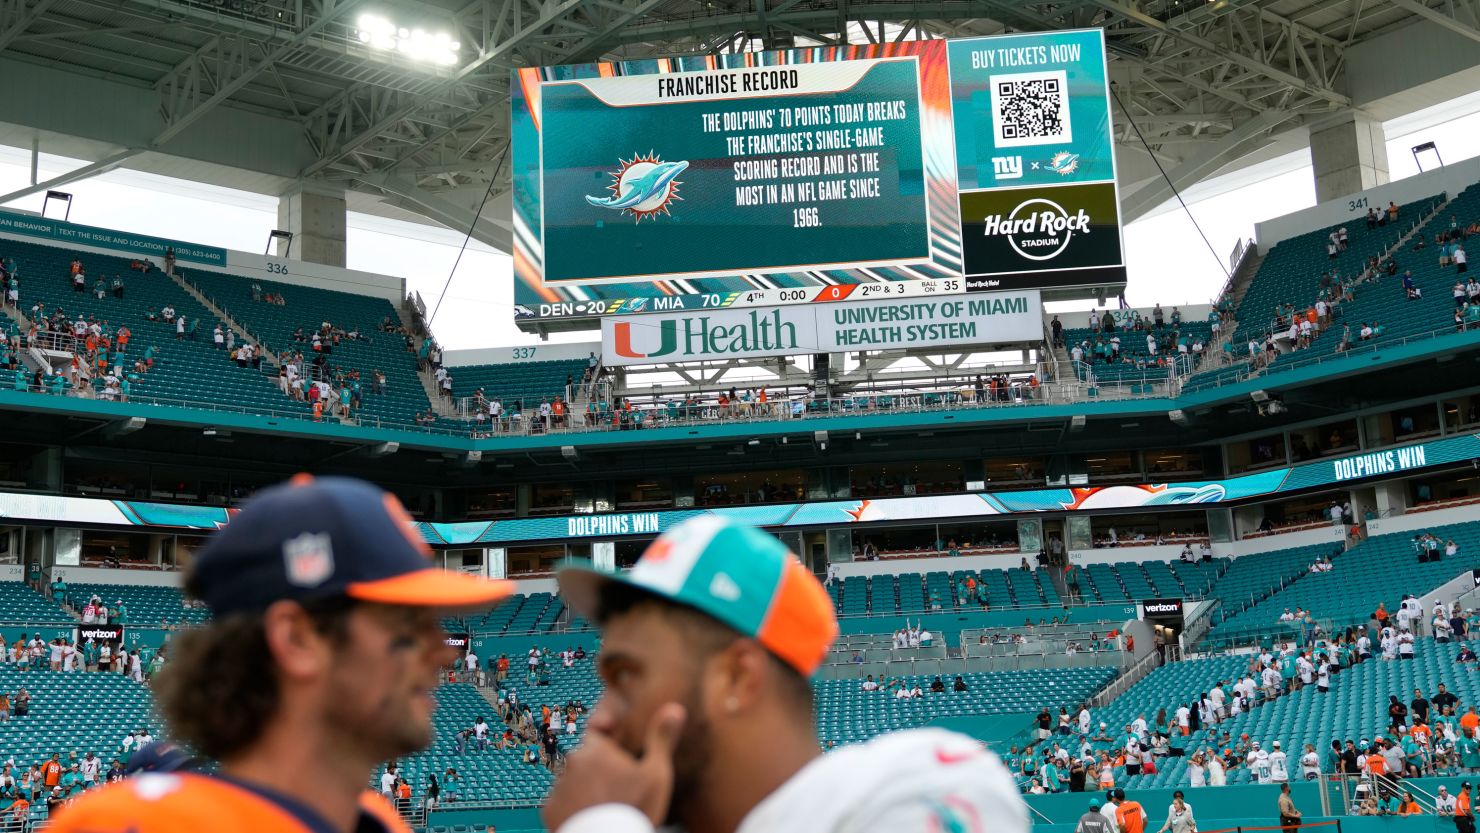 Miami Dolphins score 70 points and take a knee rather than take a shot